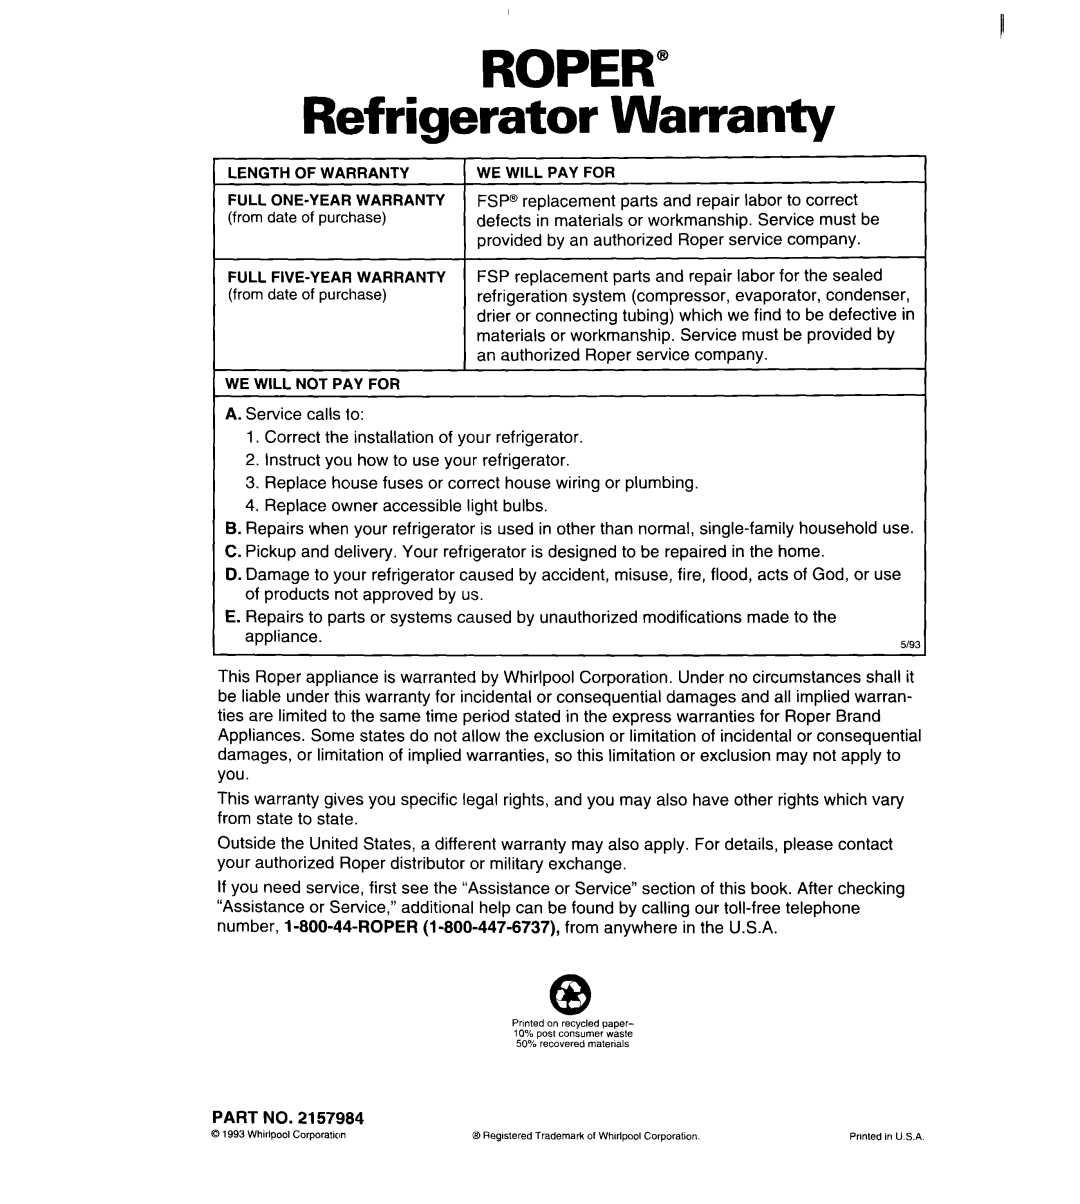 Whirlpool RS20AK, RS25AW, RS22BR, RS22AW, RS20DK important safety instructions ROPER” Refrigerator Warranty 